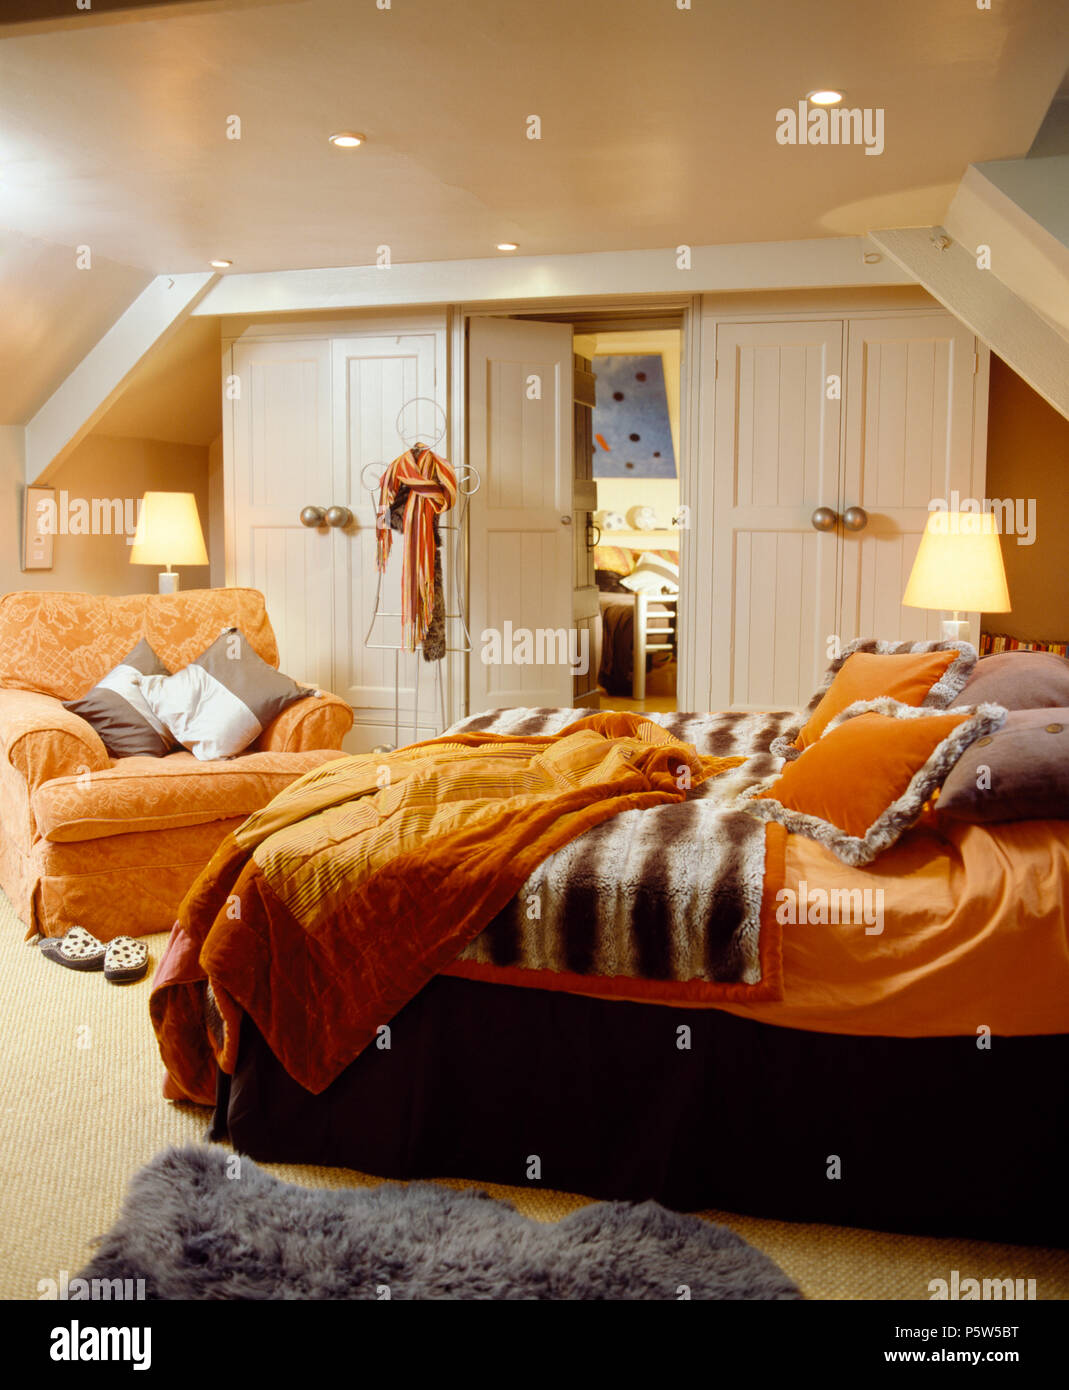 Orange quilt and linen on bed with faux fur throw on bed in attic bedroom with lighted lamps and orange armchair Stock Photo